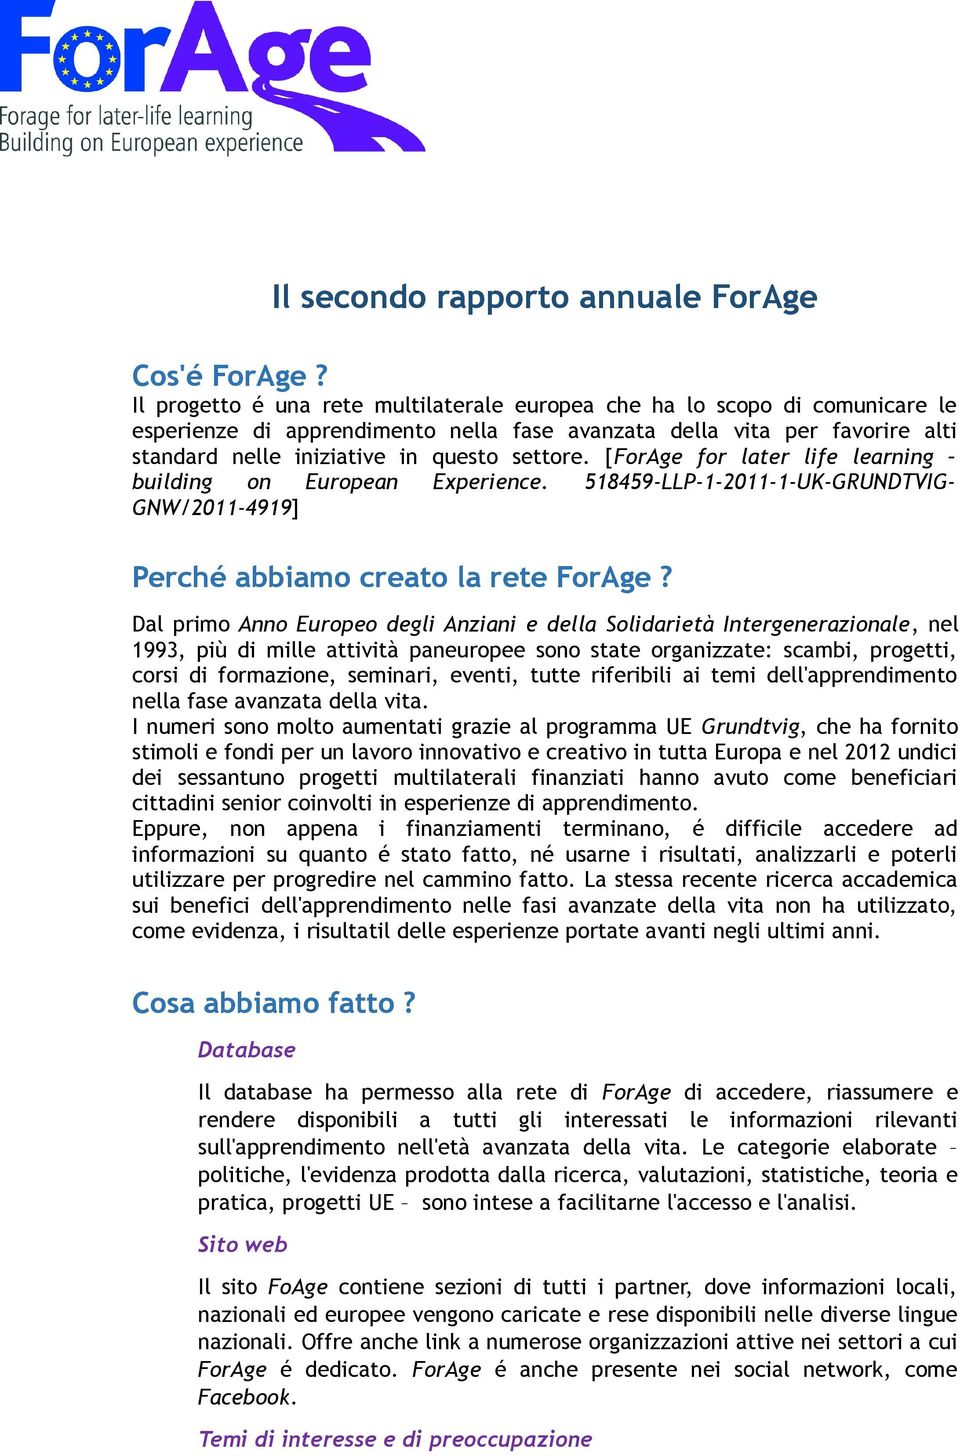 [ForAge for later life learning building on European Experience. 518459-LLP-1-2011-1-UK-GRUNDTVIG- GNW/2011-4919] Perché abbiamo creato la rete ForAge?